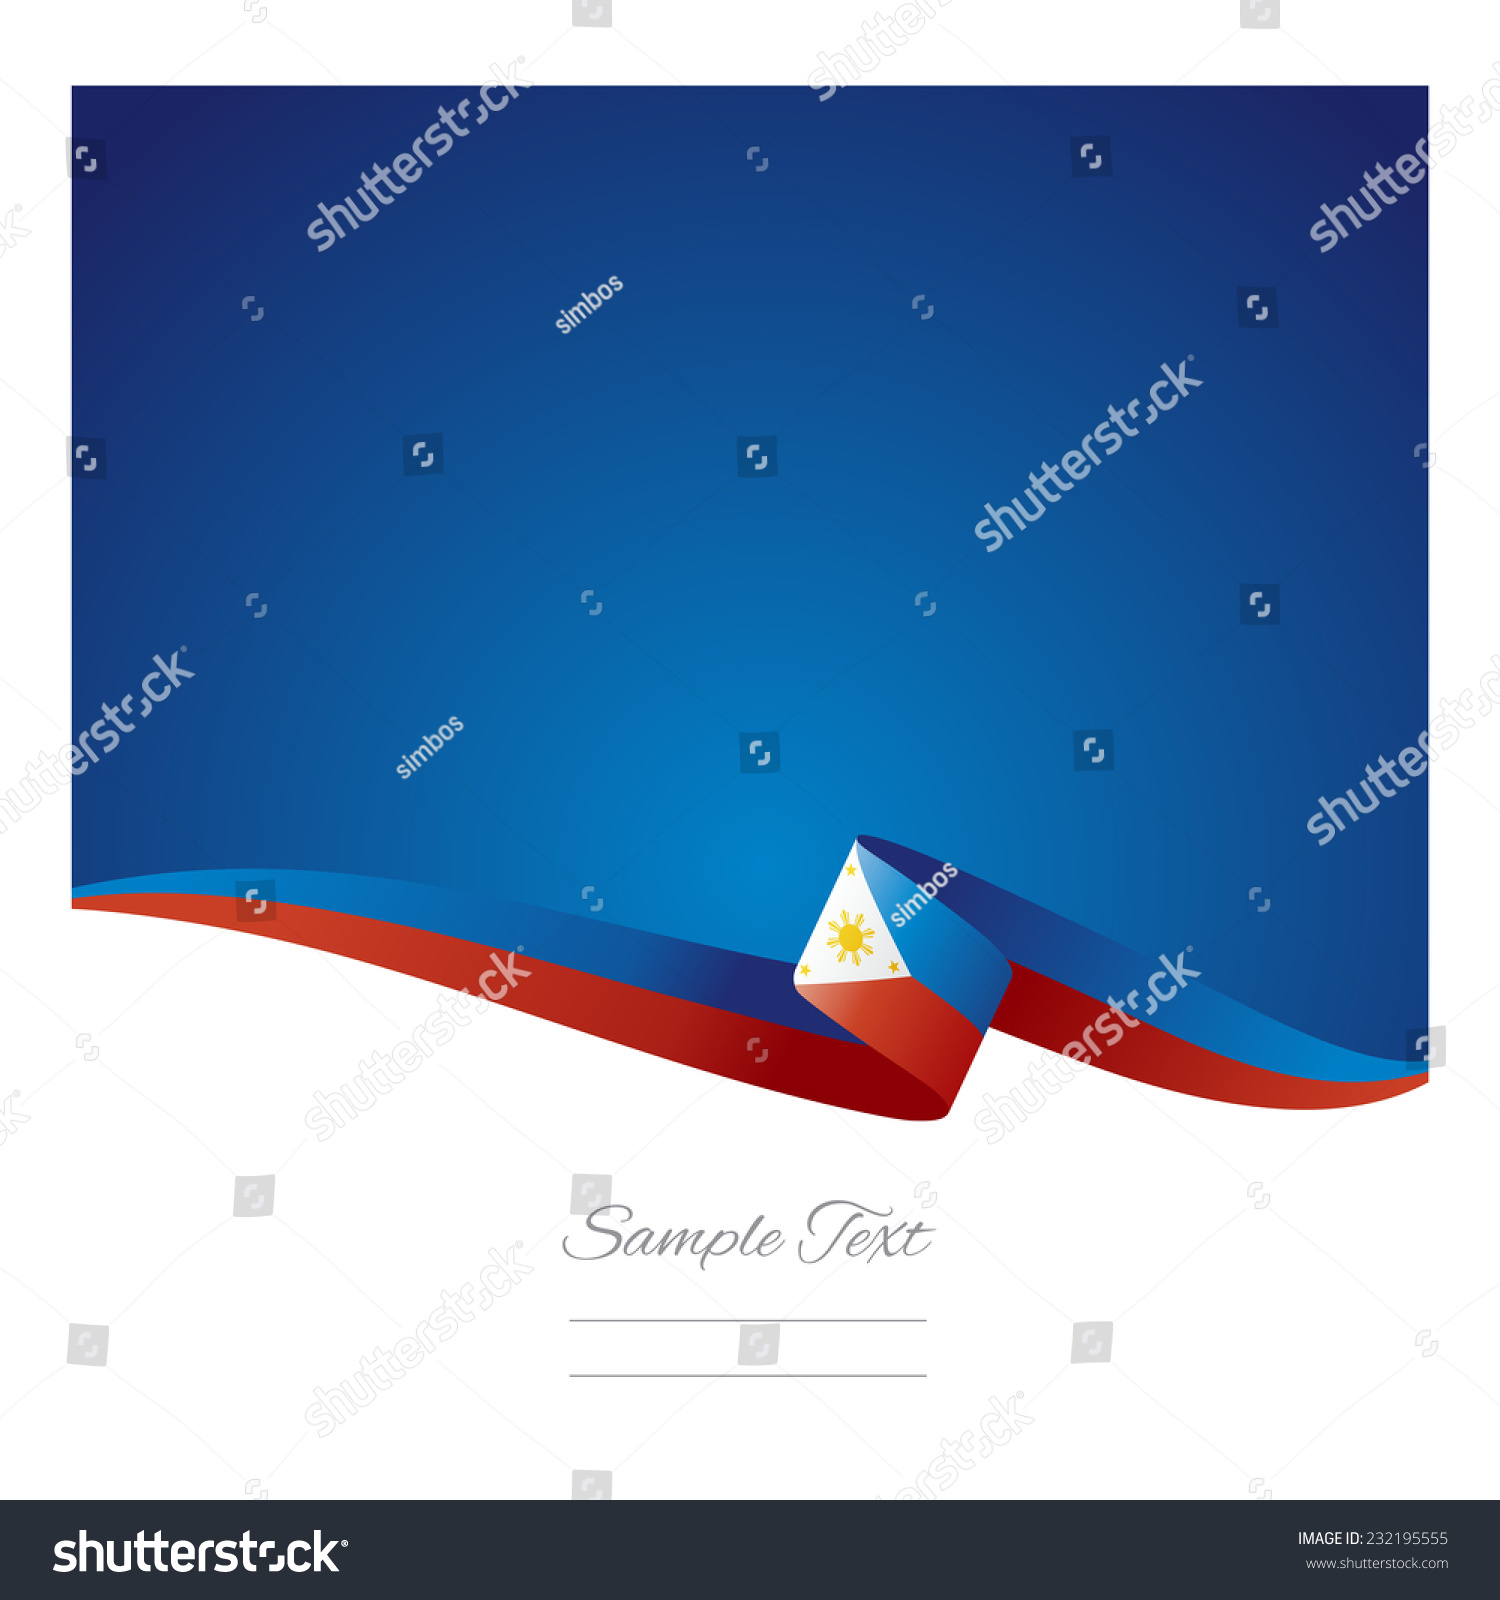 Abstract Color Background Philippine Flag Vector - 232195555 : Shutterstock